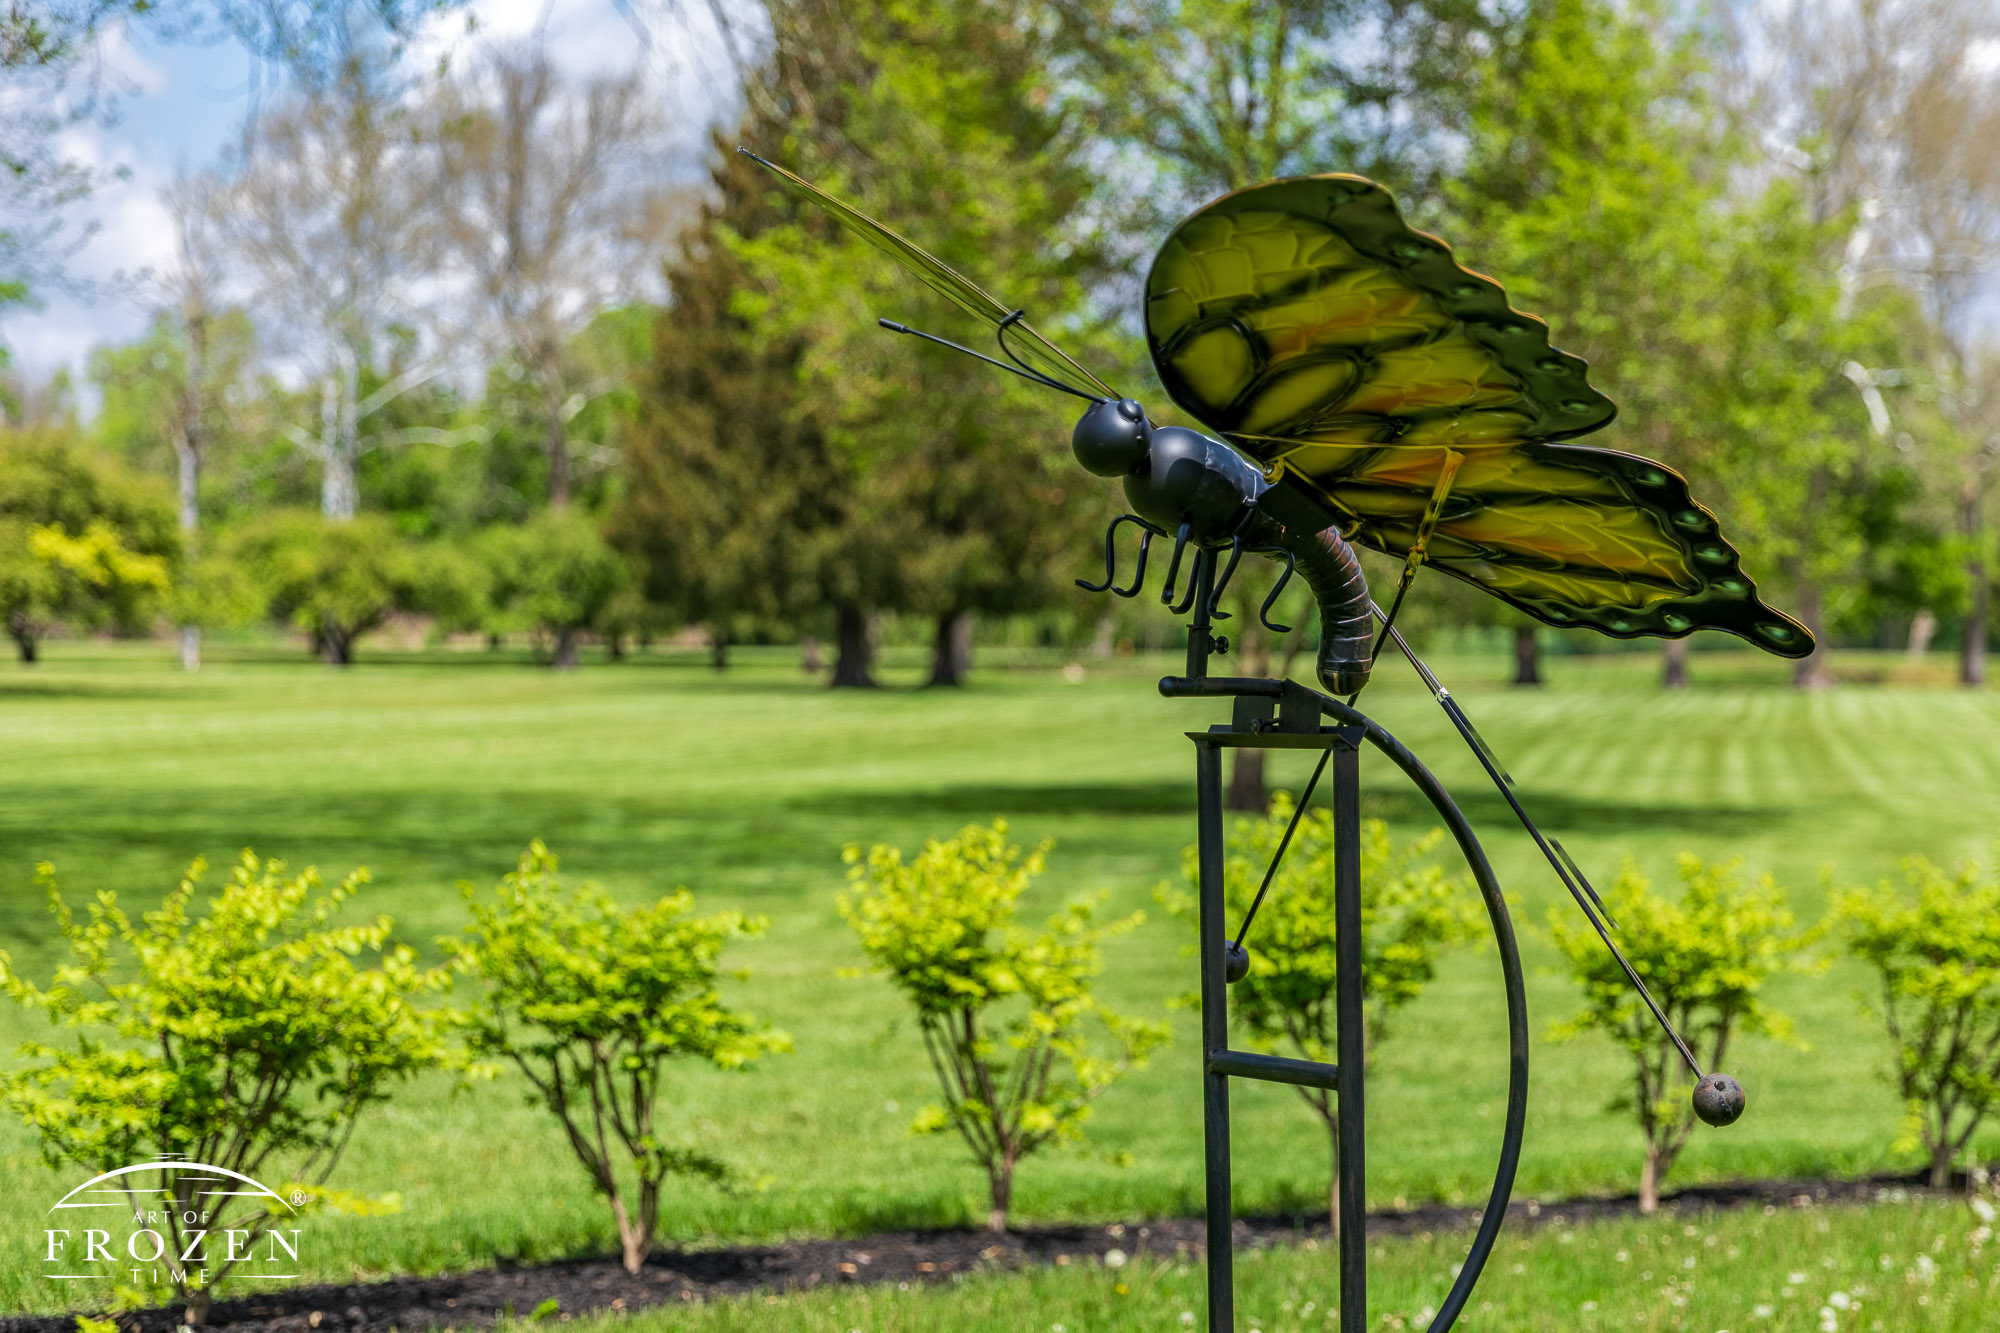 Near the Kiwanis Children’s Garden waterfall feature lies this wind mobile of a bronze butterfly with moves its wings in a slight breeze.